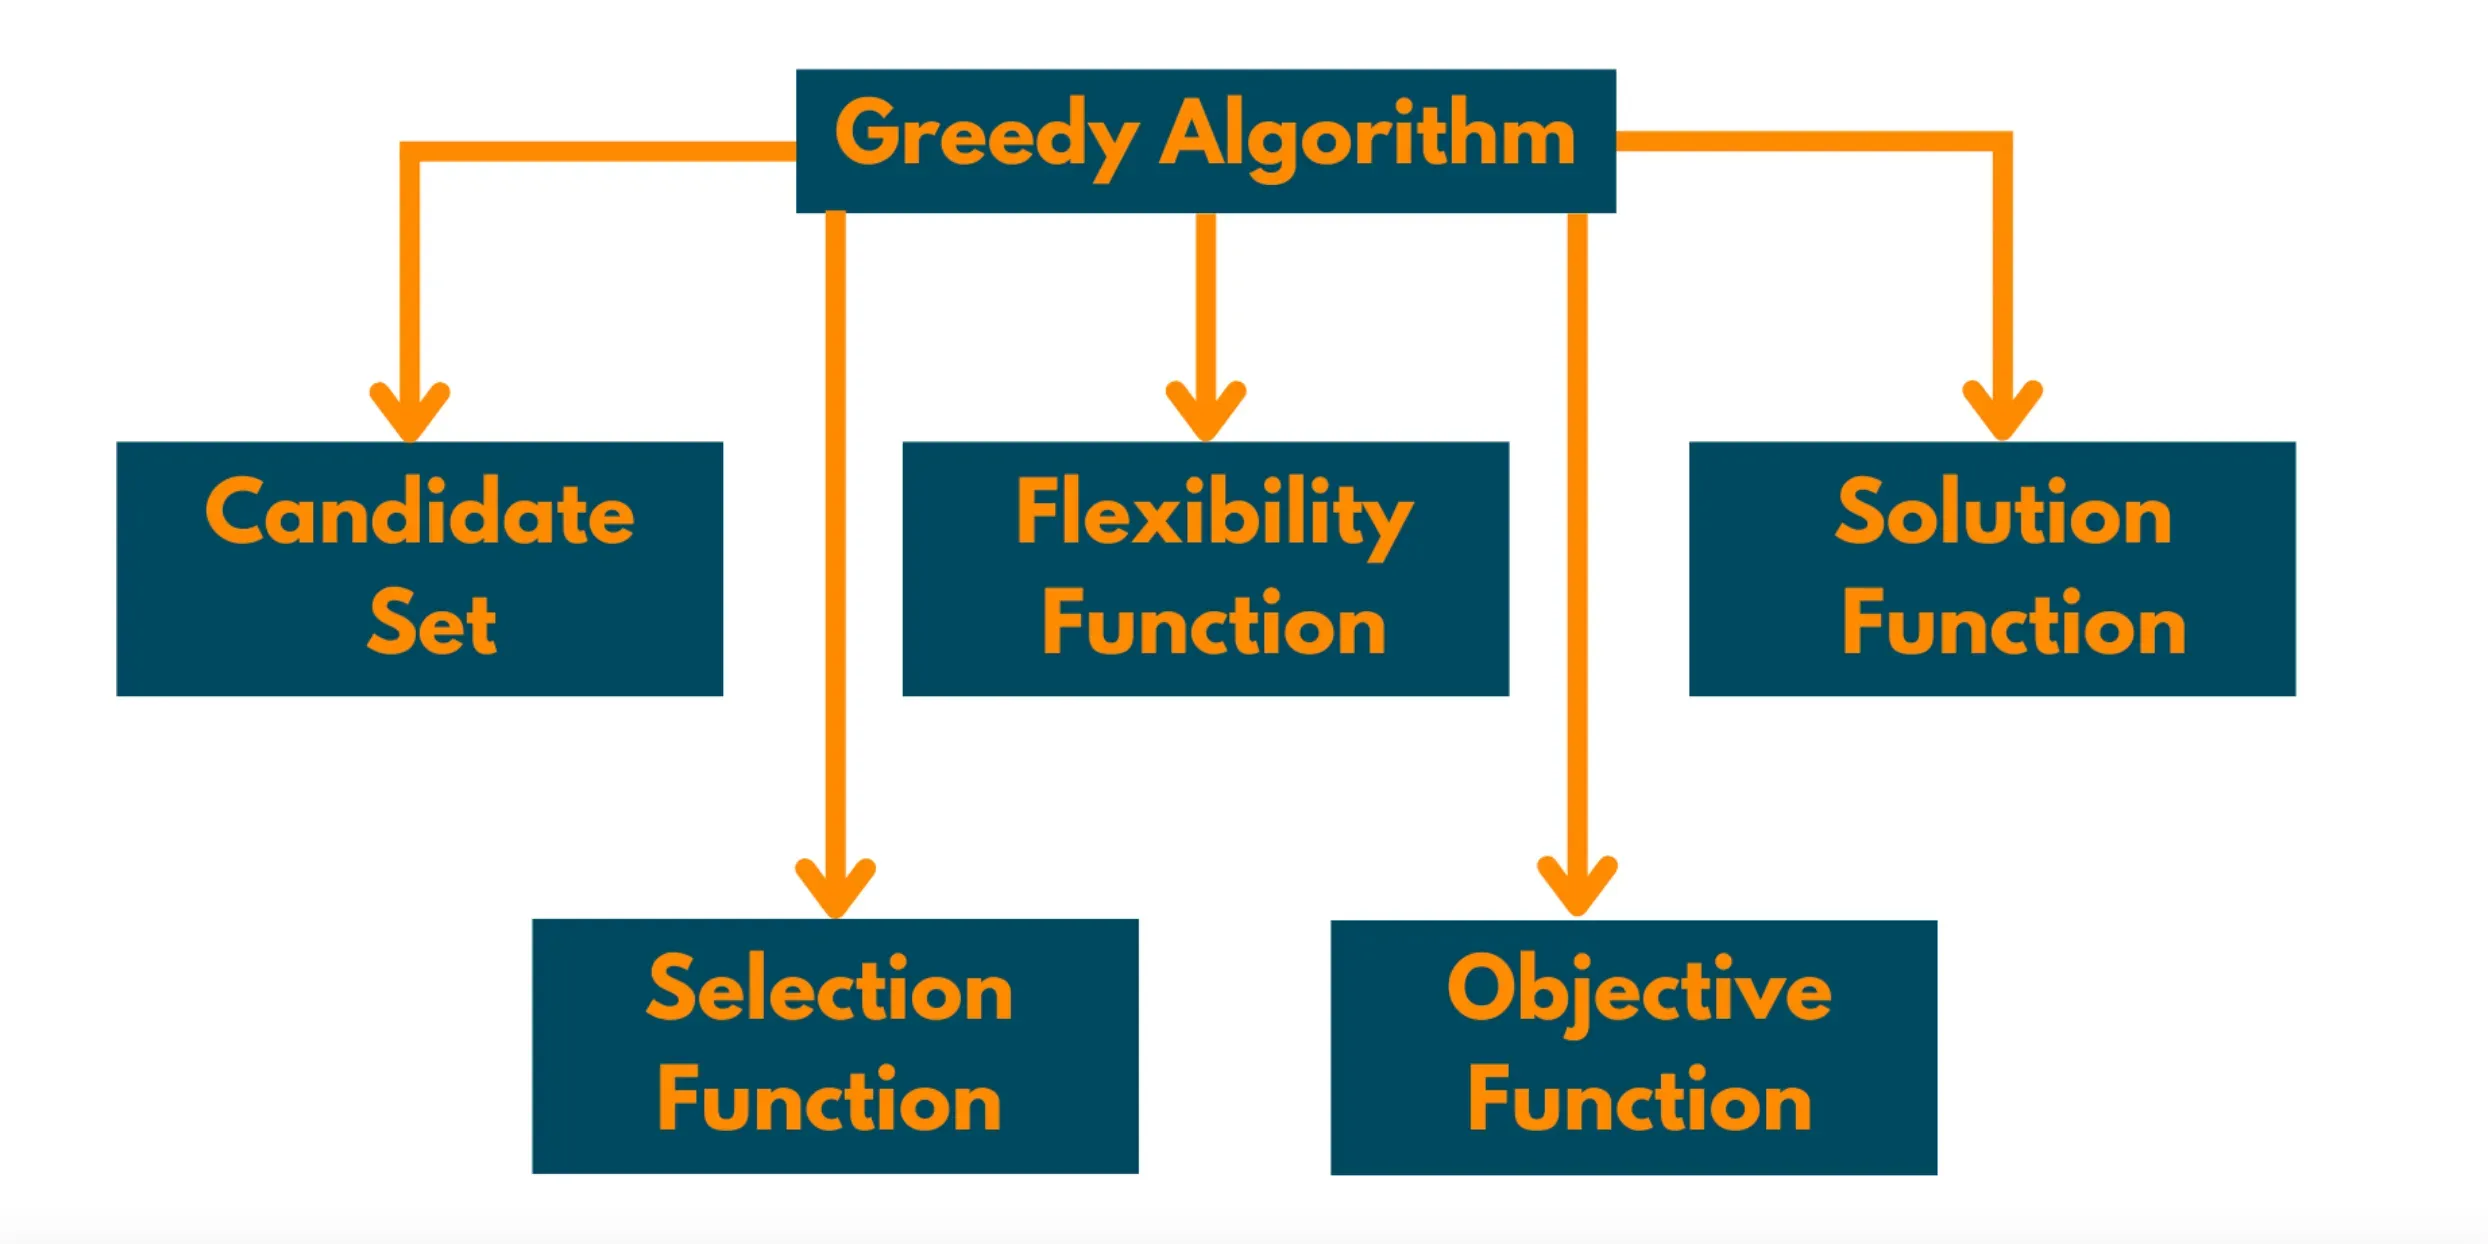 Components of Greedy Algorithms